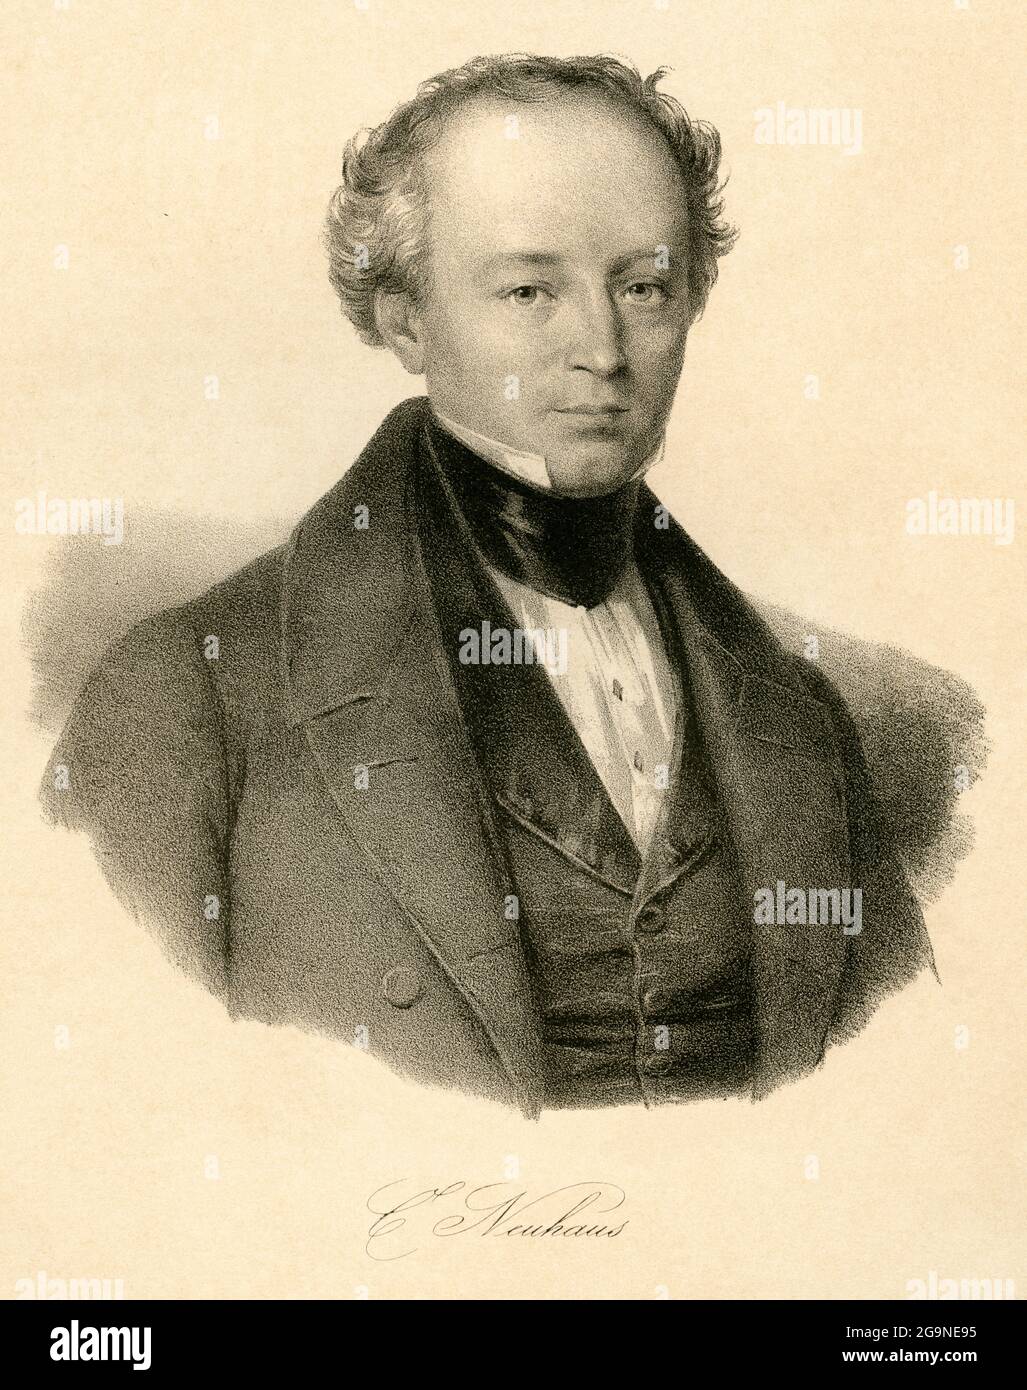 Johann Karl Friedrich Neuhaus, Swiss politician, steel engraving, probably around 1850th ?, artist unknown , ARTIST'S COPYRIGHT HAS NOT TO BE CLEARED Stock Photo